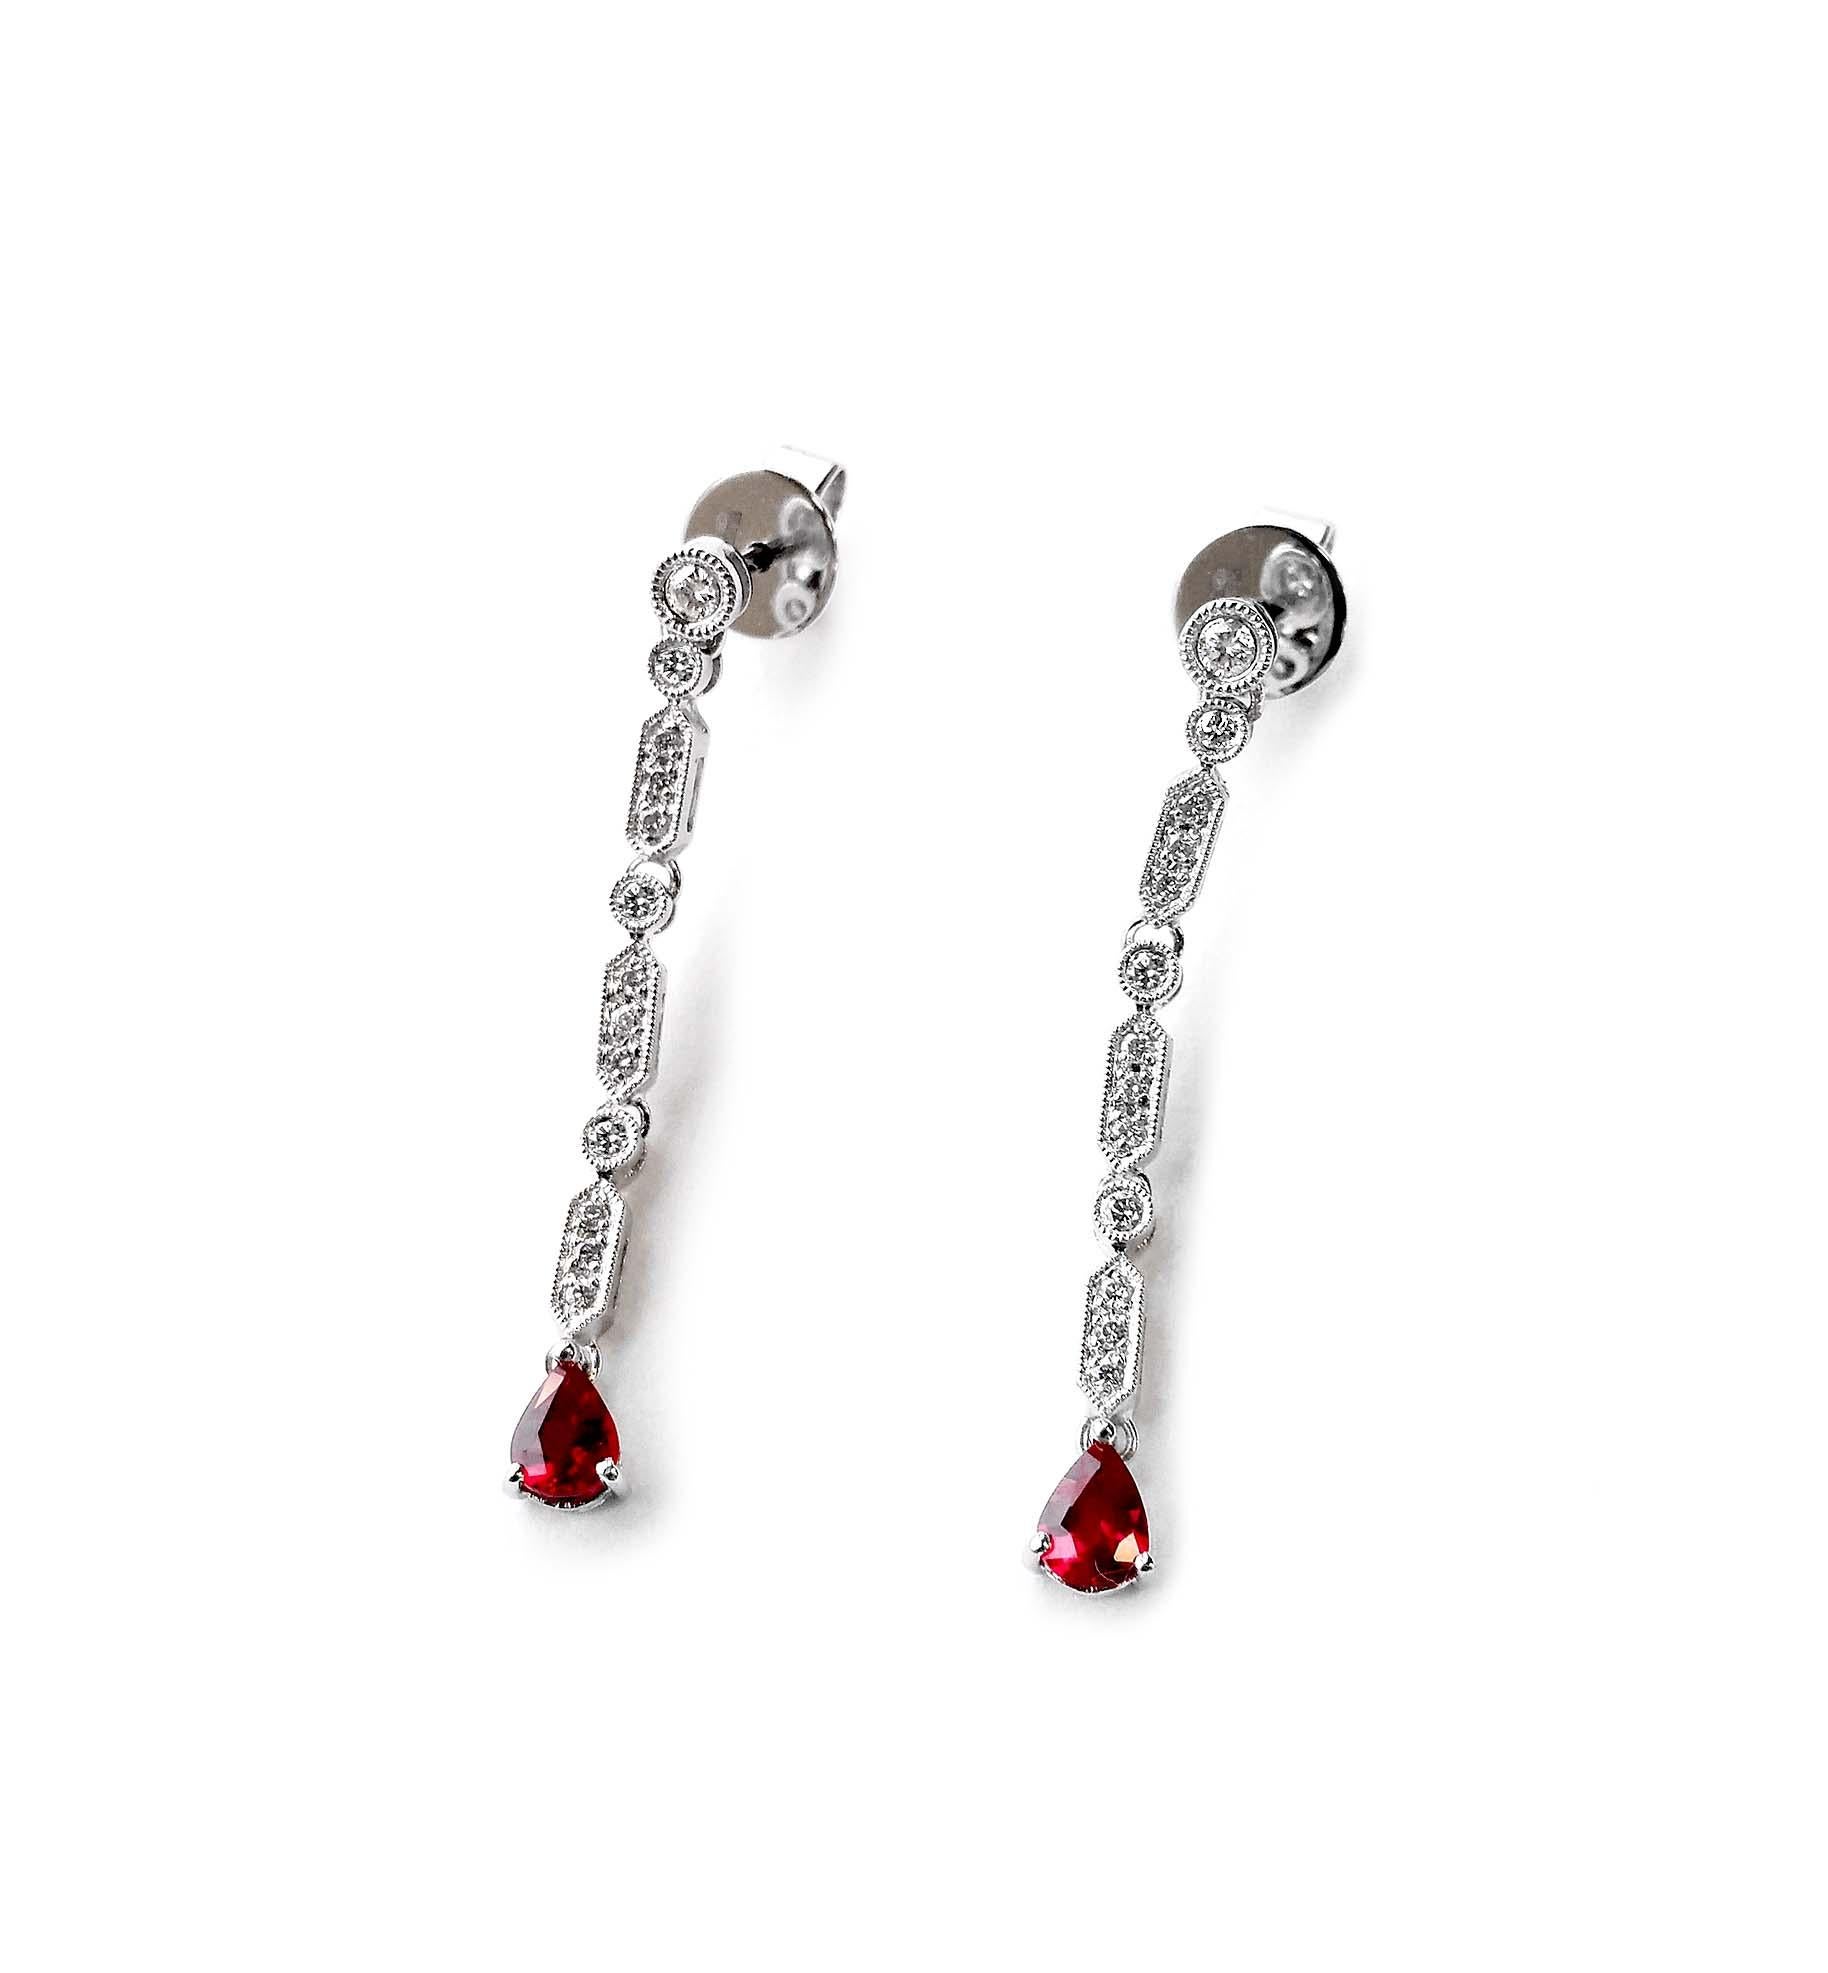 Produced by award winning Italian designer Stefano Vitolo. Stefano creates custom artisanal one of a kind jewelry with excellent gemstones in a truly old world Italian craftmanship.

Gemstones: 0.60ct Rubies, 0.30ct Diamonds
